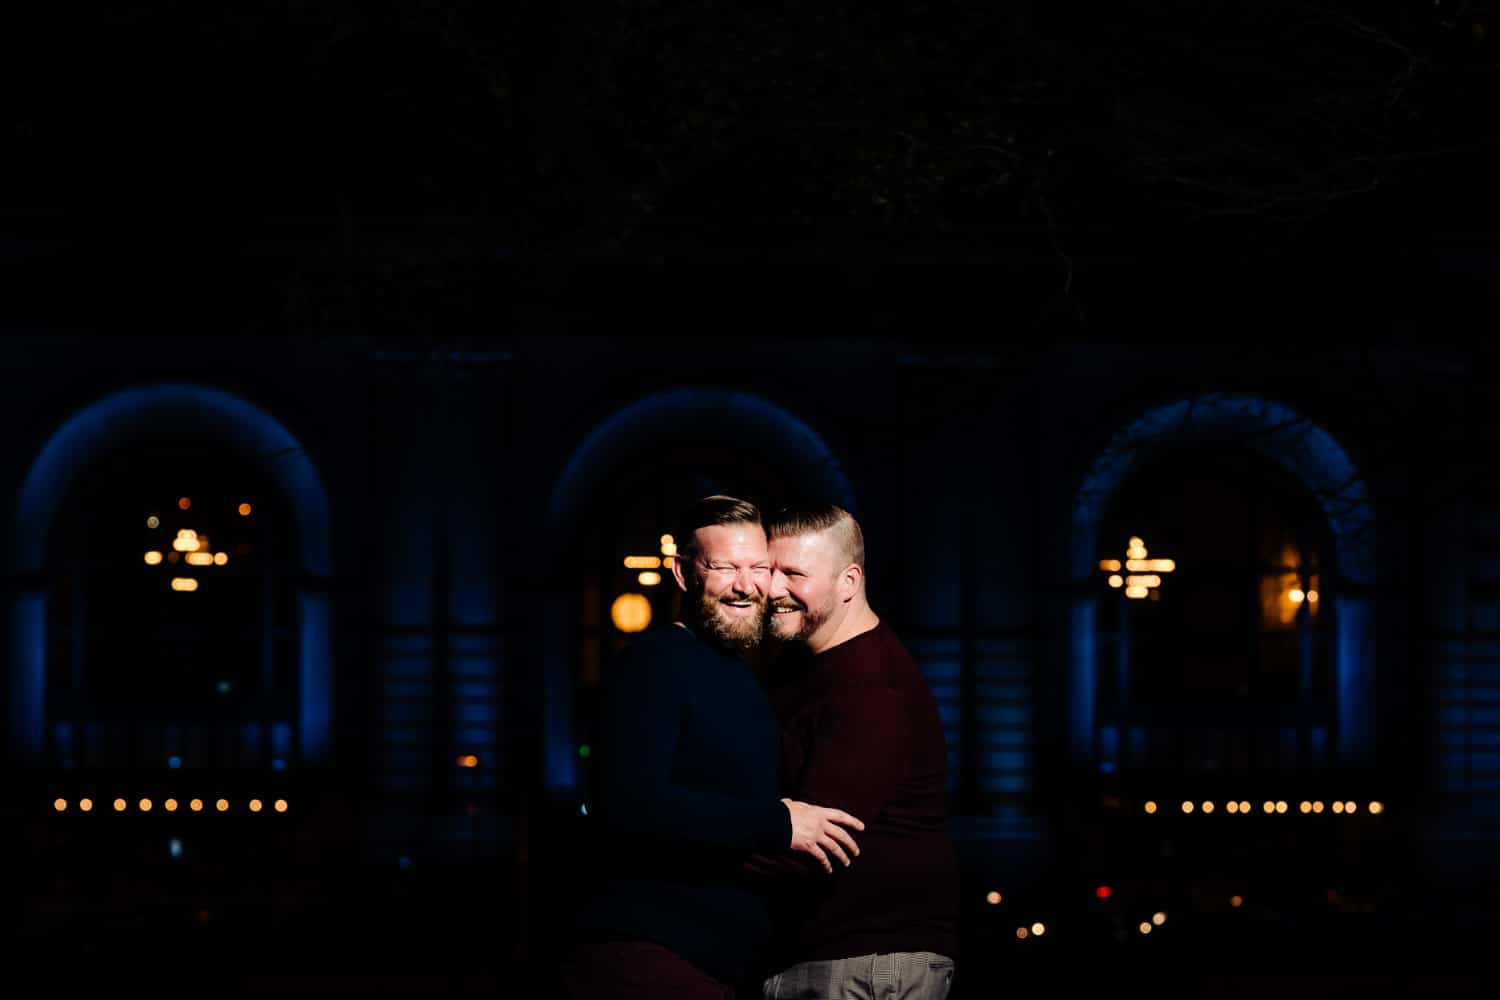 A candid picture of an engaged couple sharing an embrace and laughing together during a nighttime engagement session, Union Station visible in the background. 